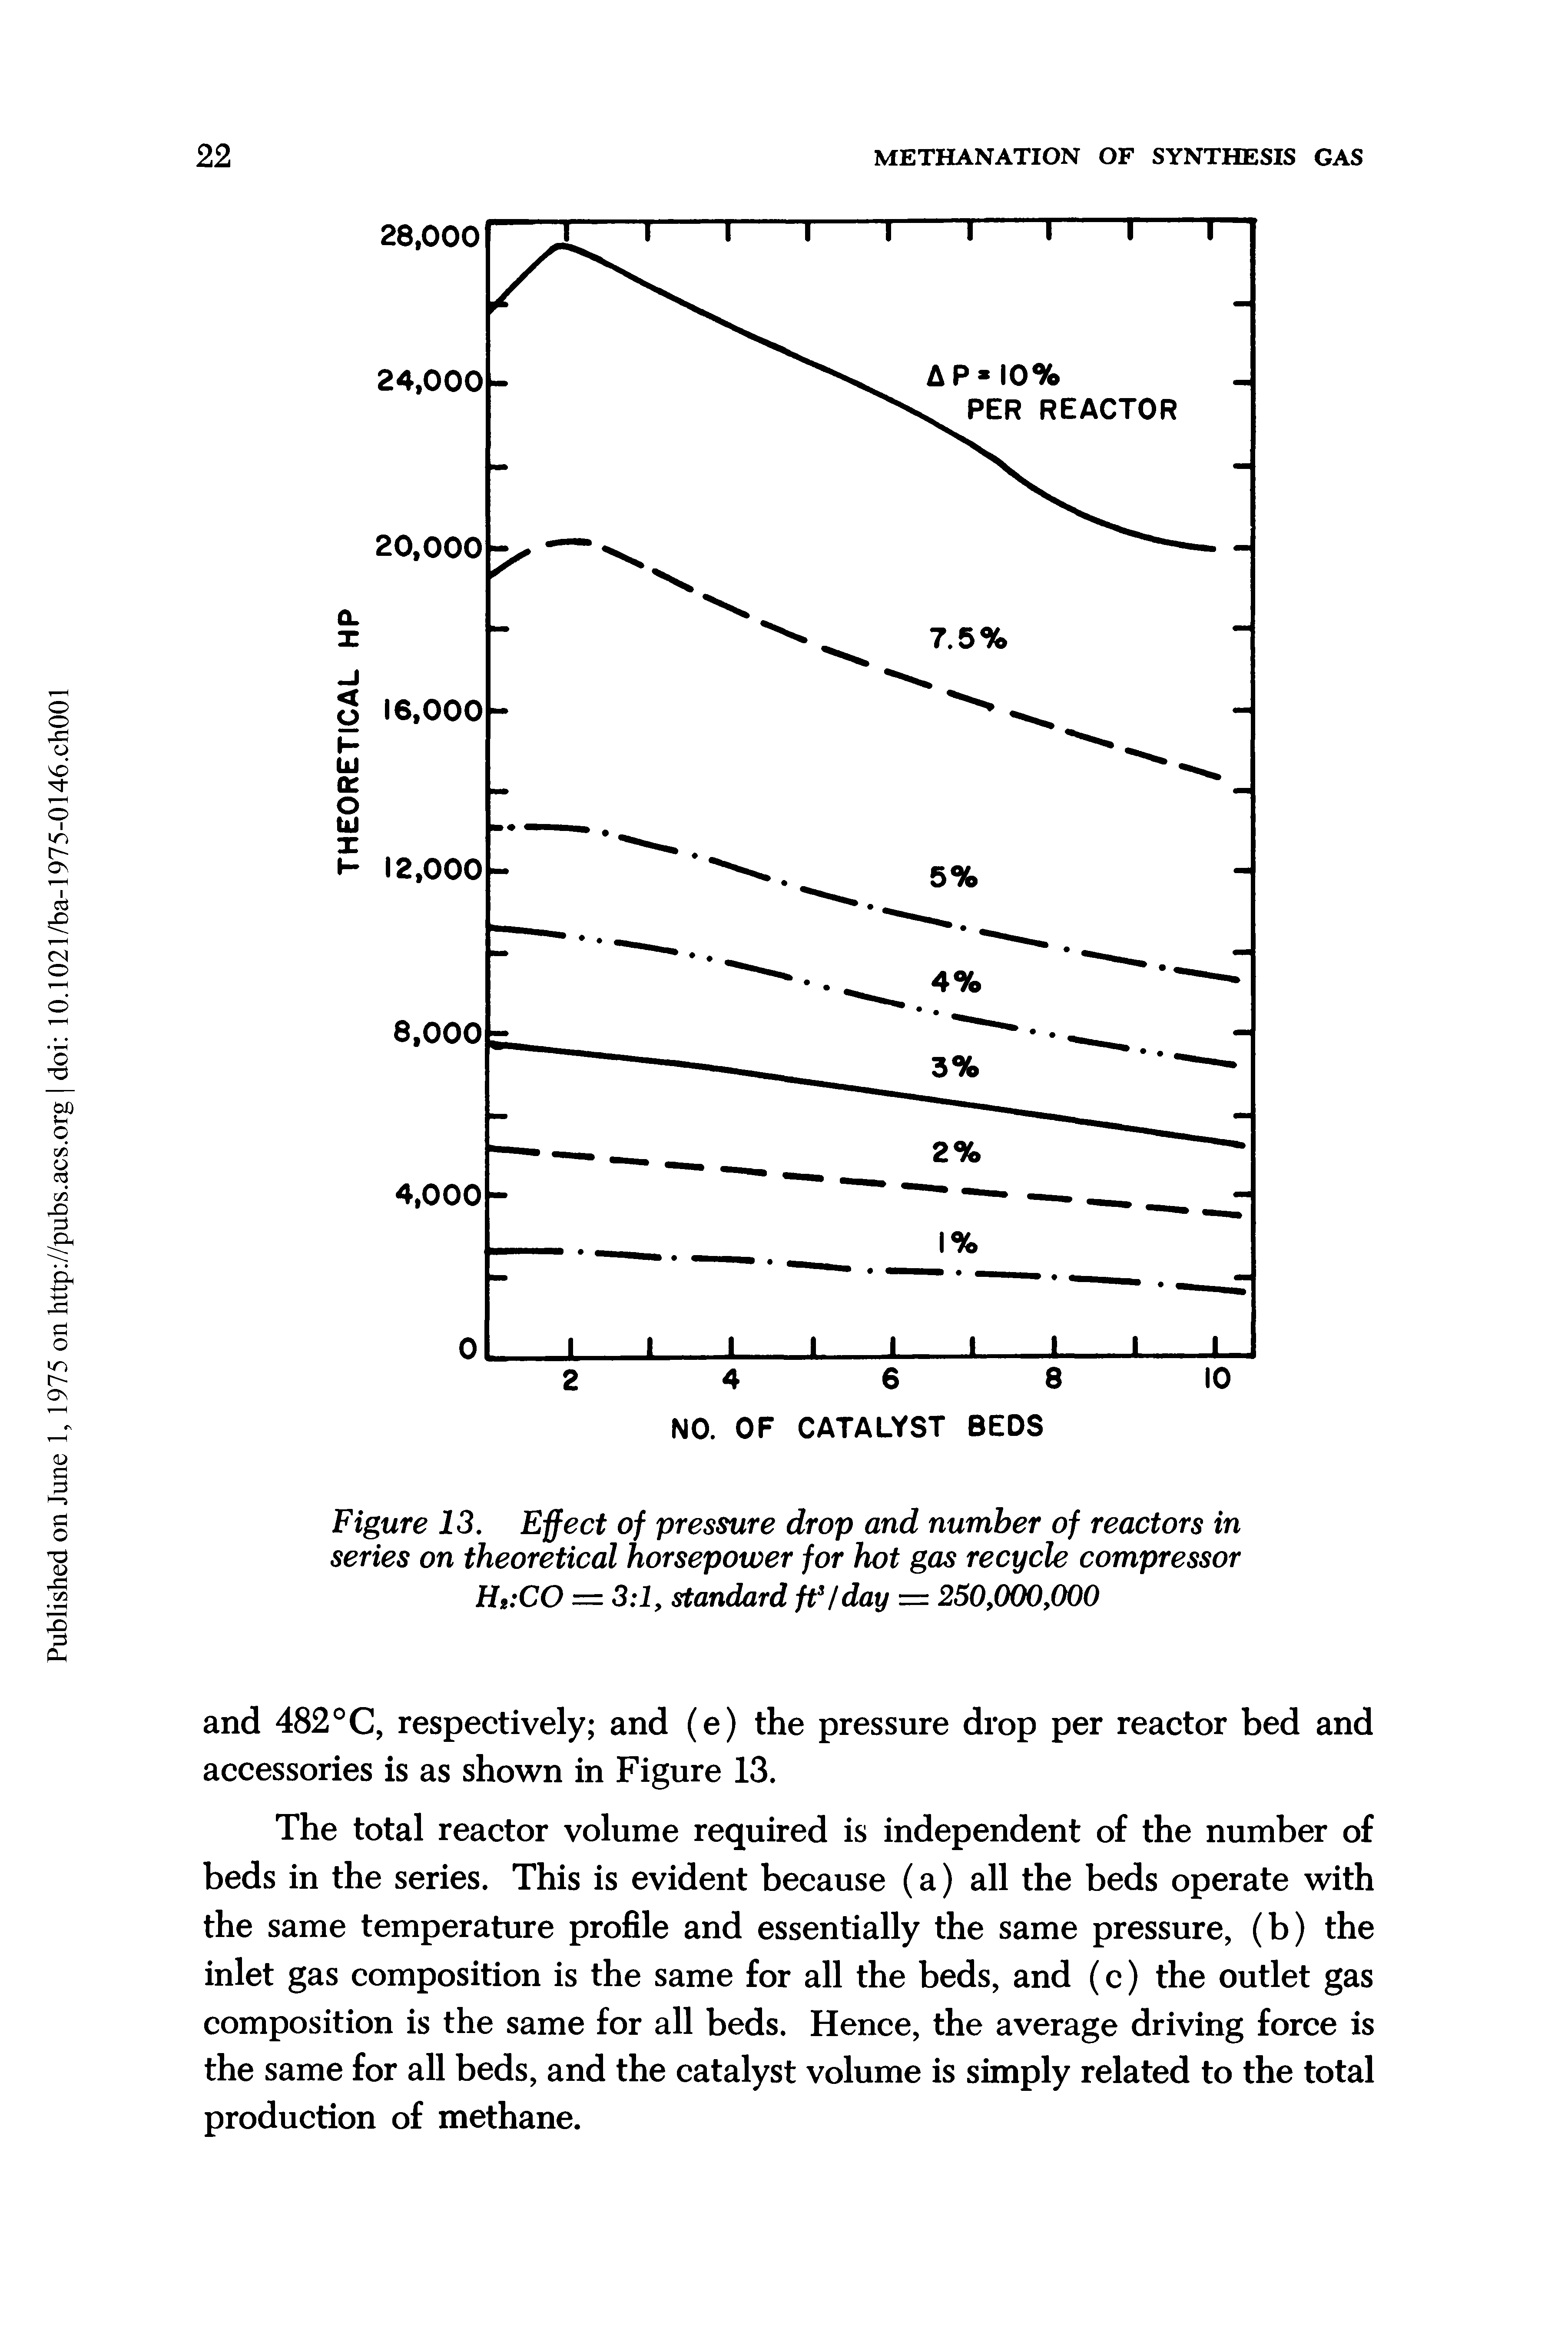 Figure 13. Effect of pressure drop and number of reactors in series on theoretical horsepower for hot gas recycle compressor H CO = 3 1, standard ff/day = 250,000,000...